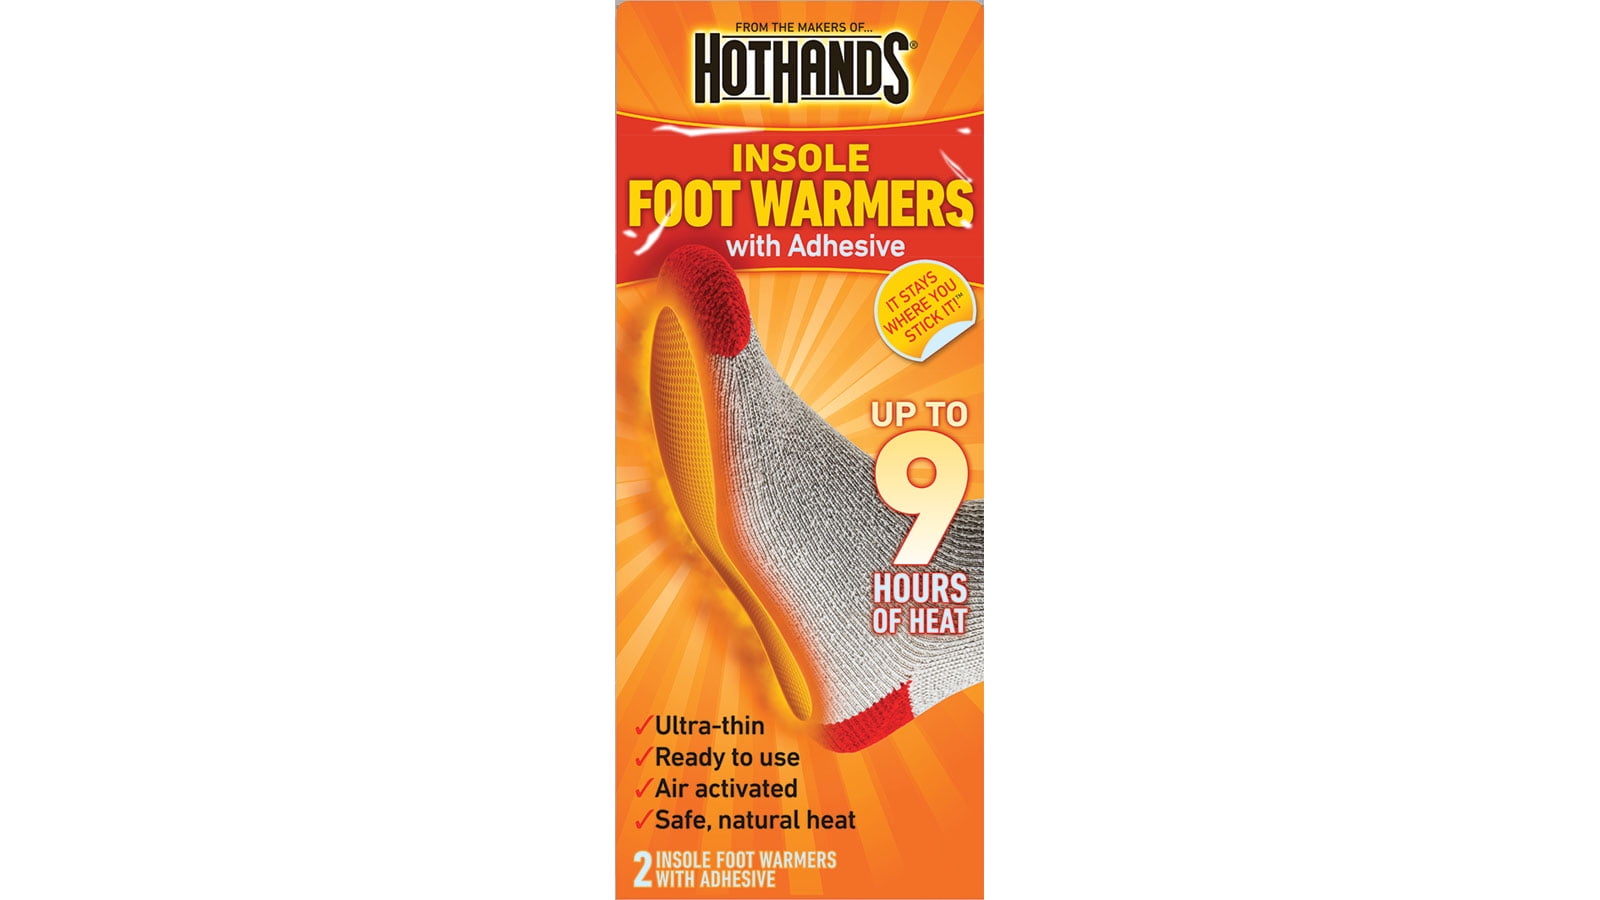 HotHands Insole Foot Warmers 16 pairs 